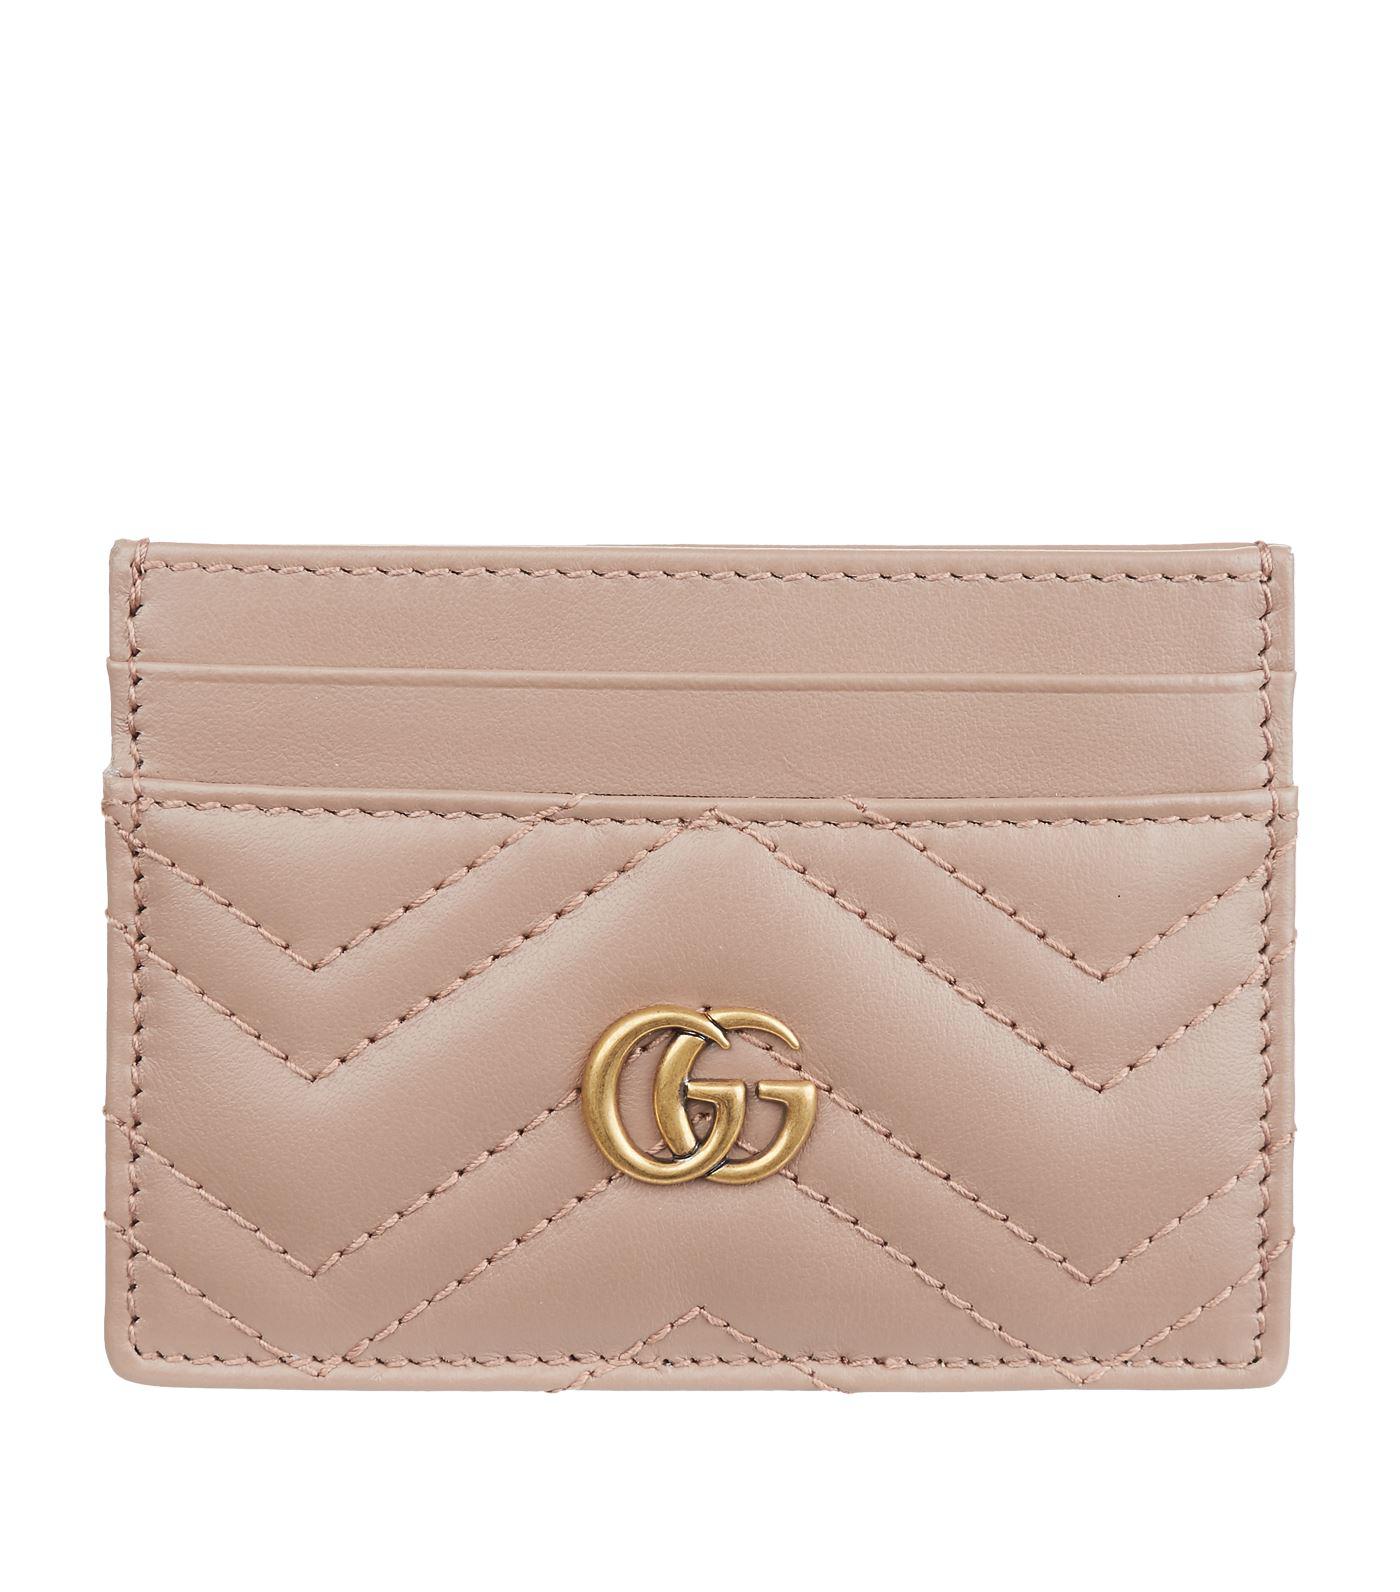 Gucci Leather Marmont Card Holder in Pink - Lyst